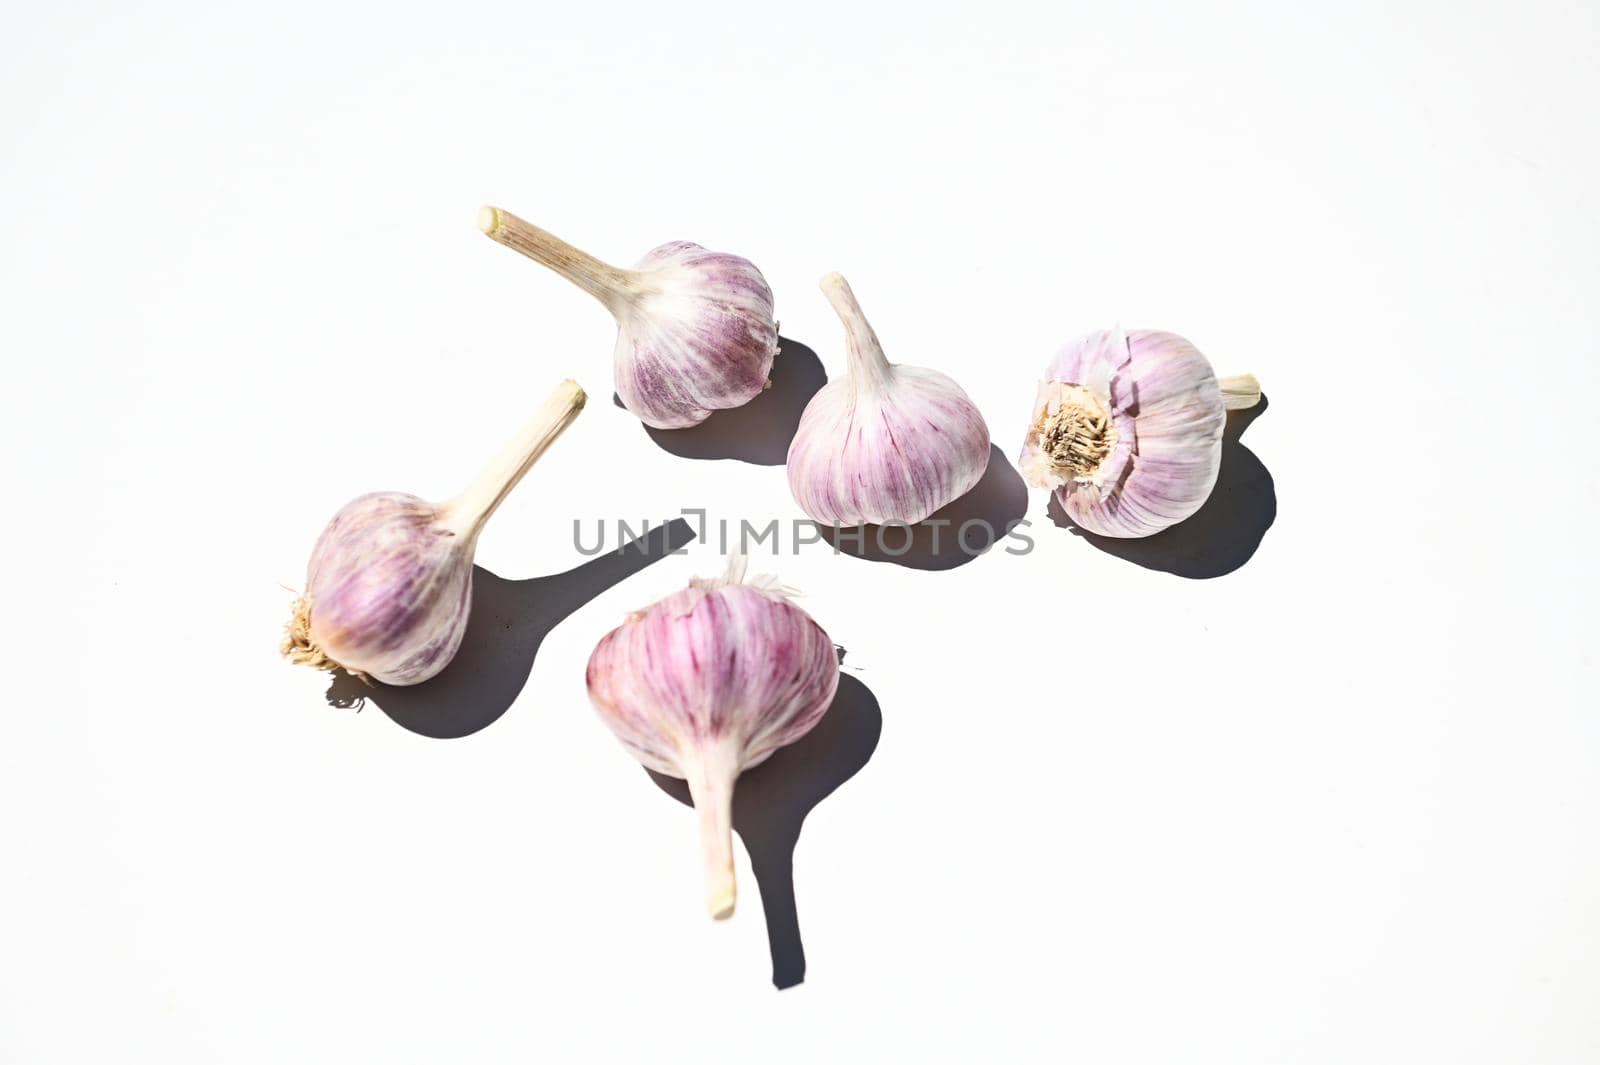 Flay lay of composition of three raw garlic heads, isolated on white background with copy space for advertising text. Web banner. Horizontal studio shot